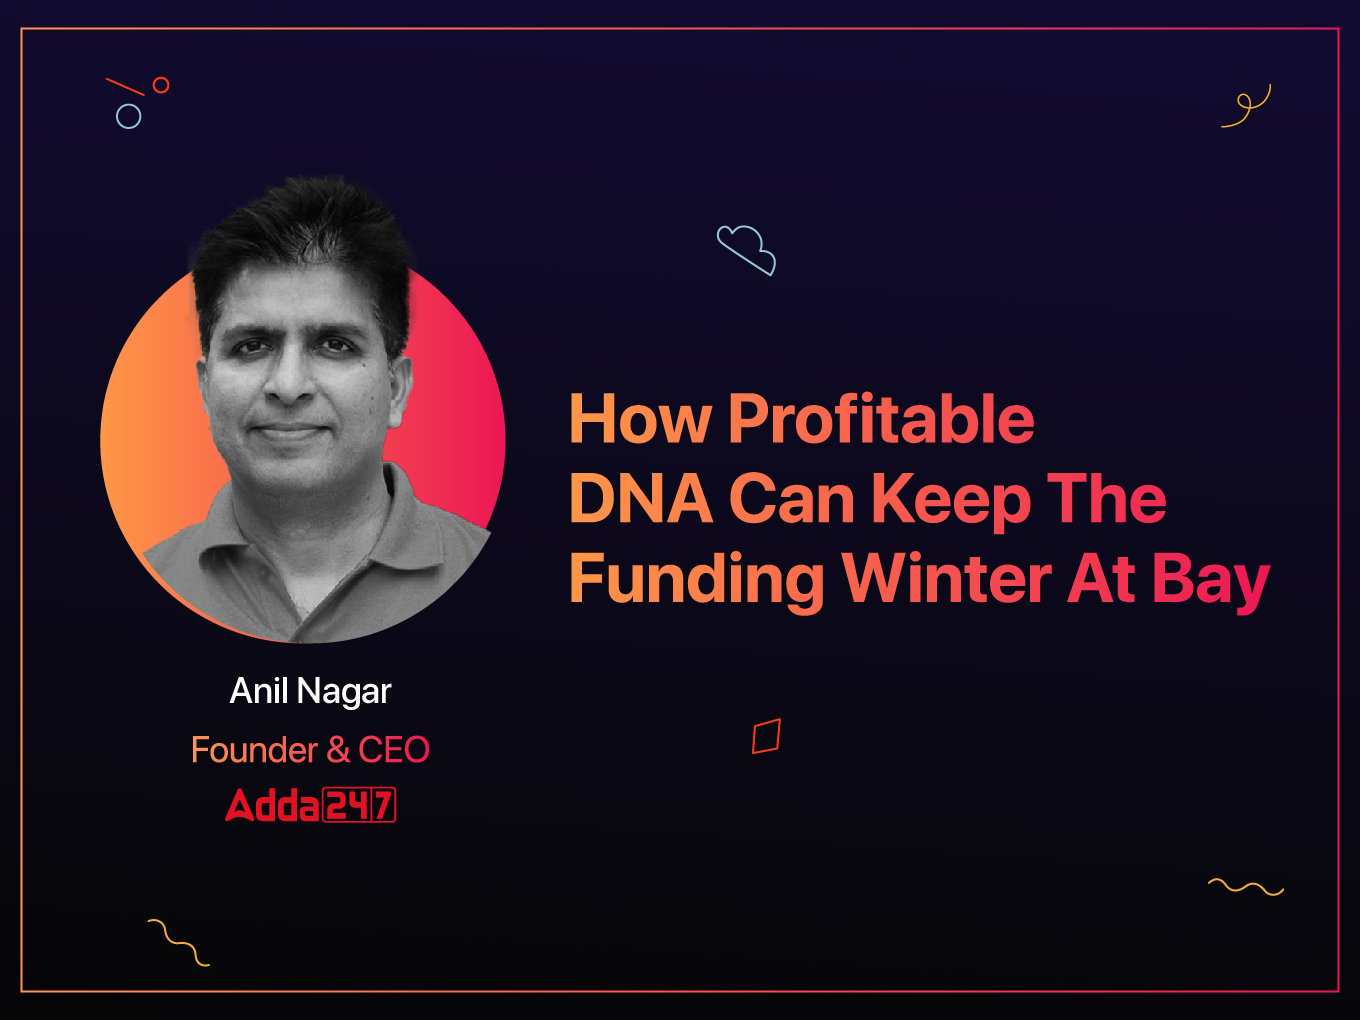 How Profitable DNA Can Keep The Funding Winter At Bay